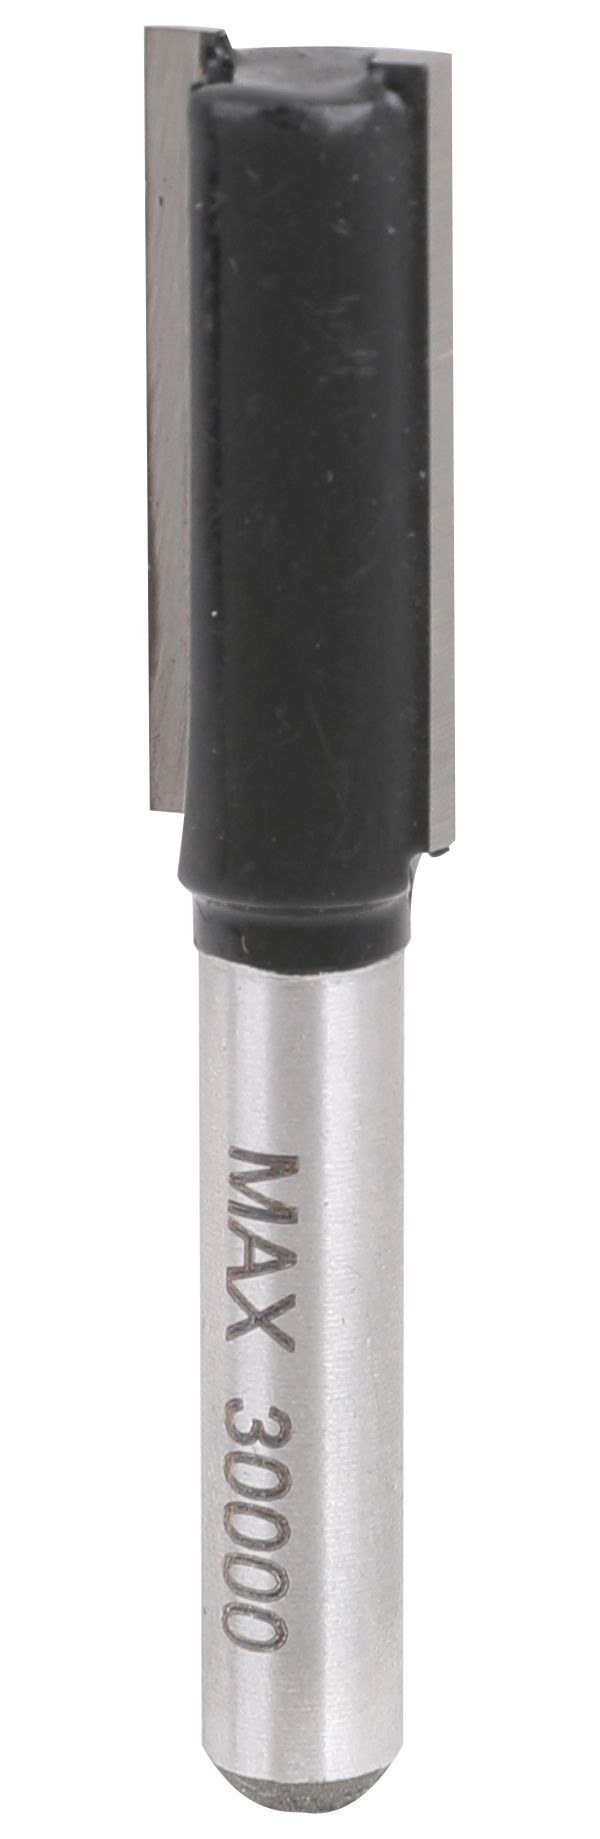 Wickes Straight Router Bit 1/4in - 10mm